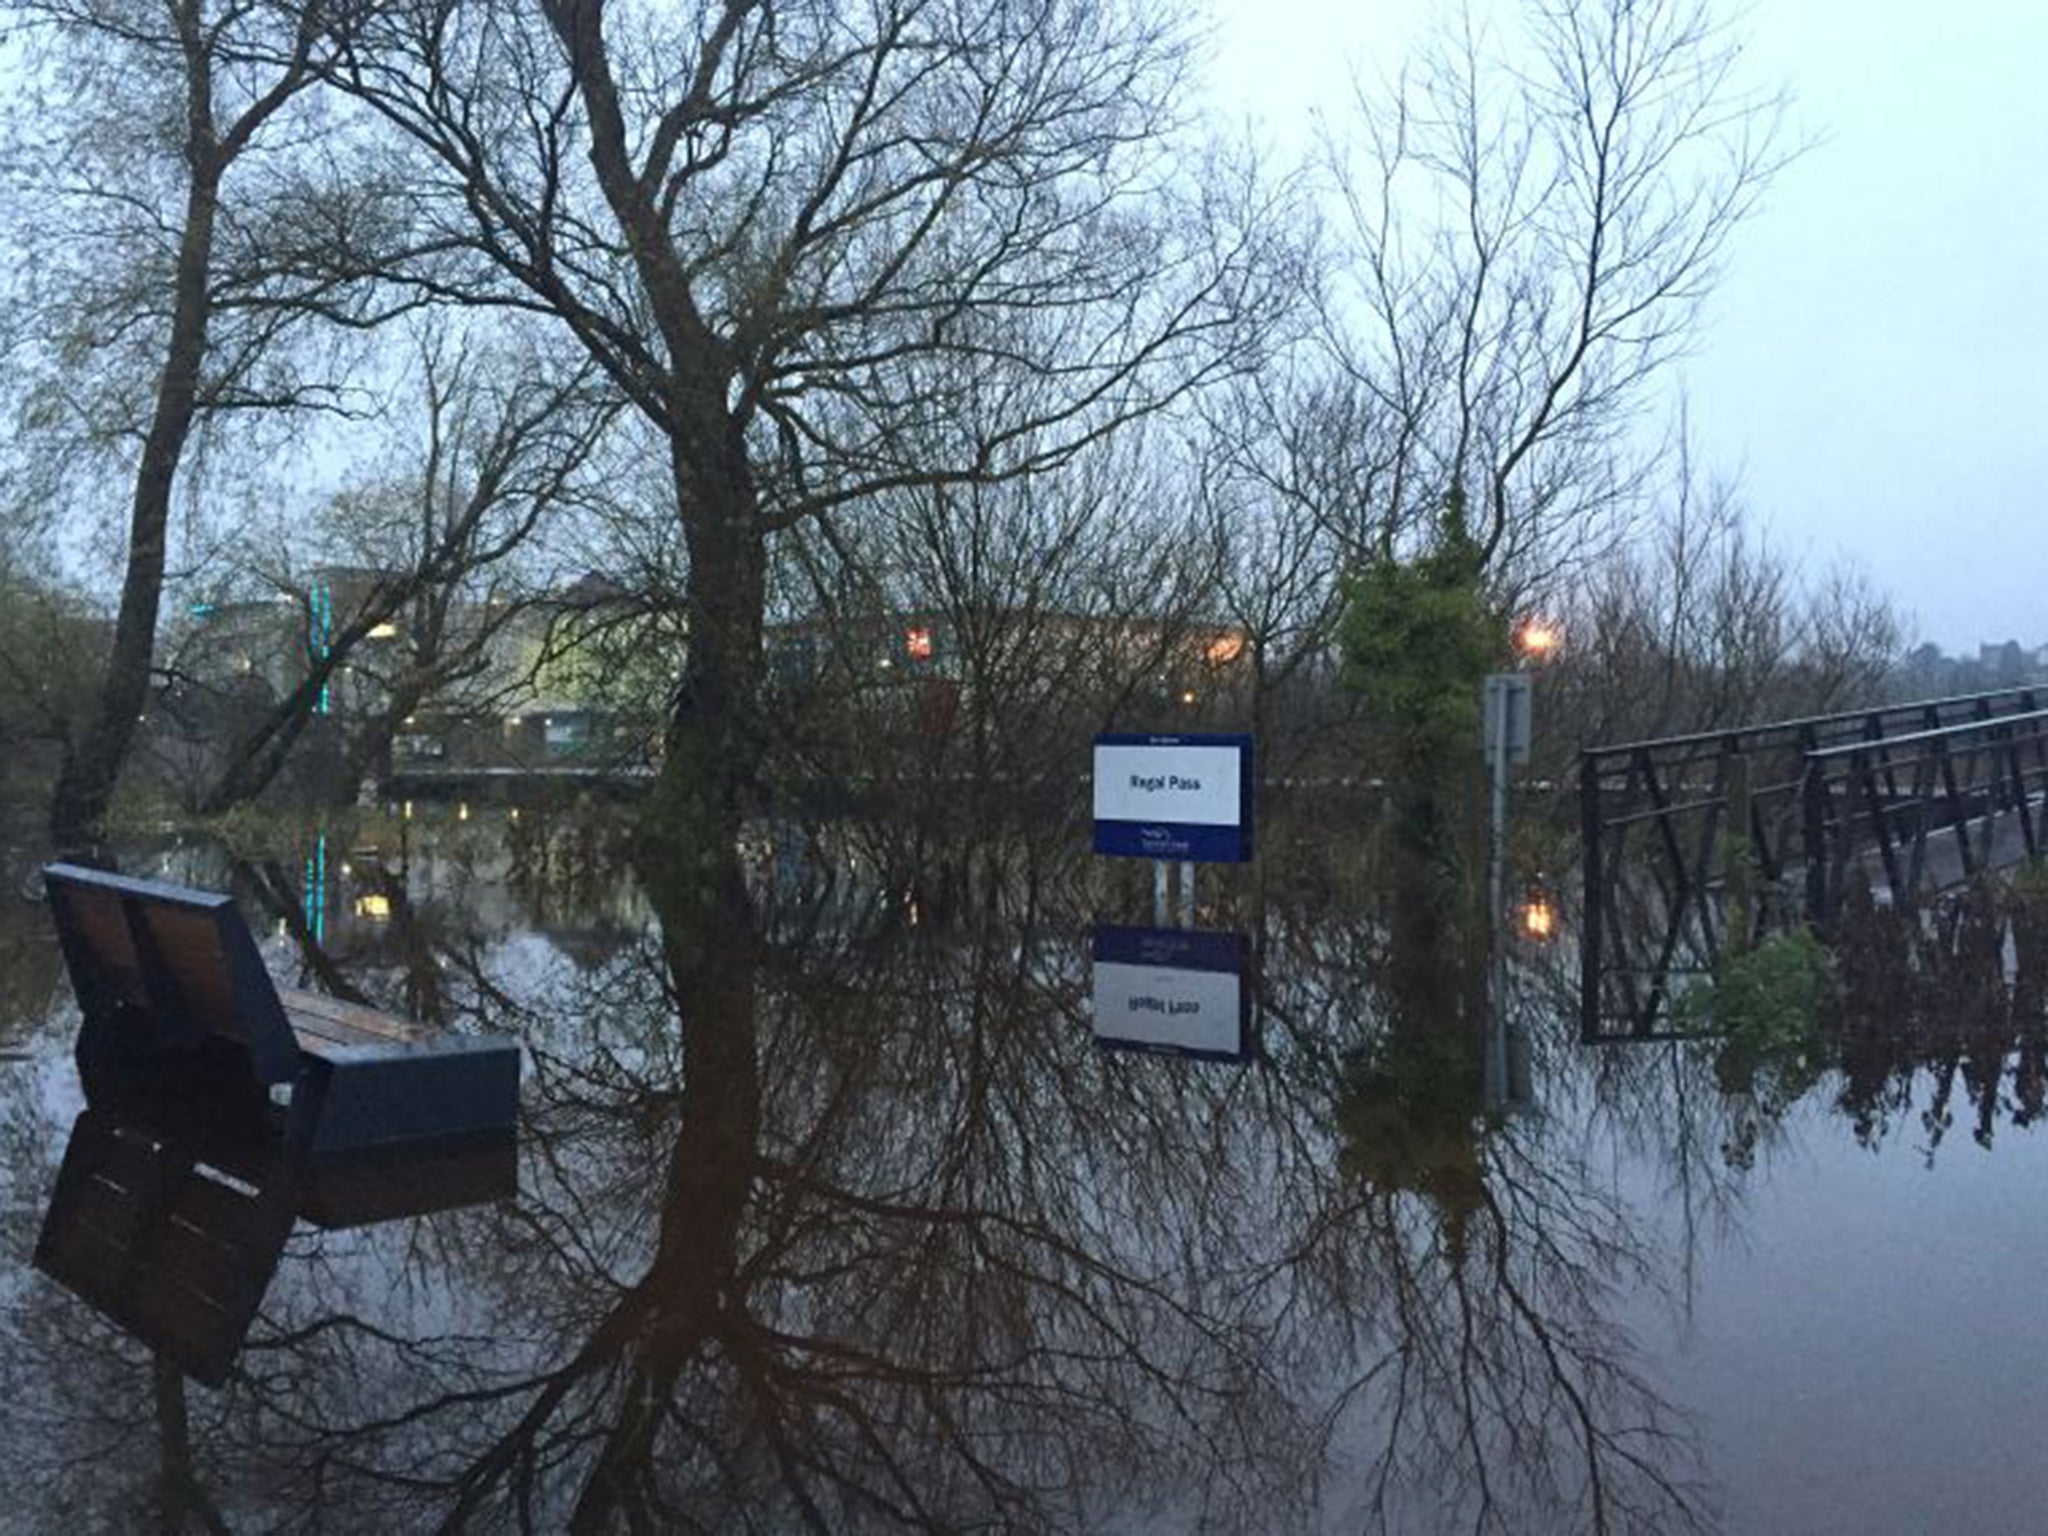 Flooding continues along the banks of the River Shannon, Ireland, as part of “trends” of severe weather events